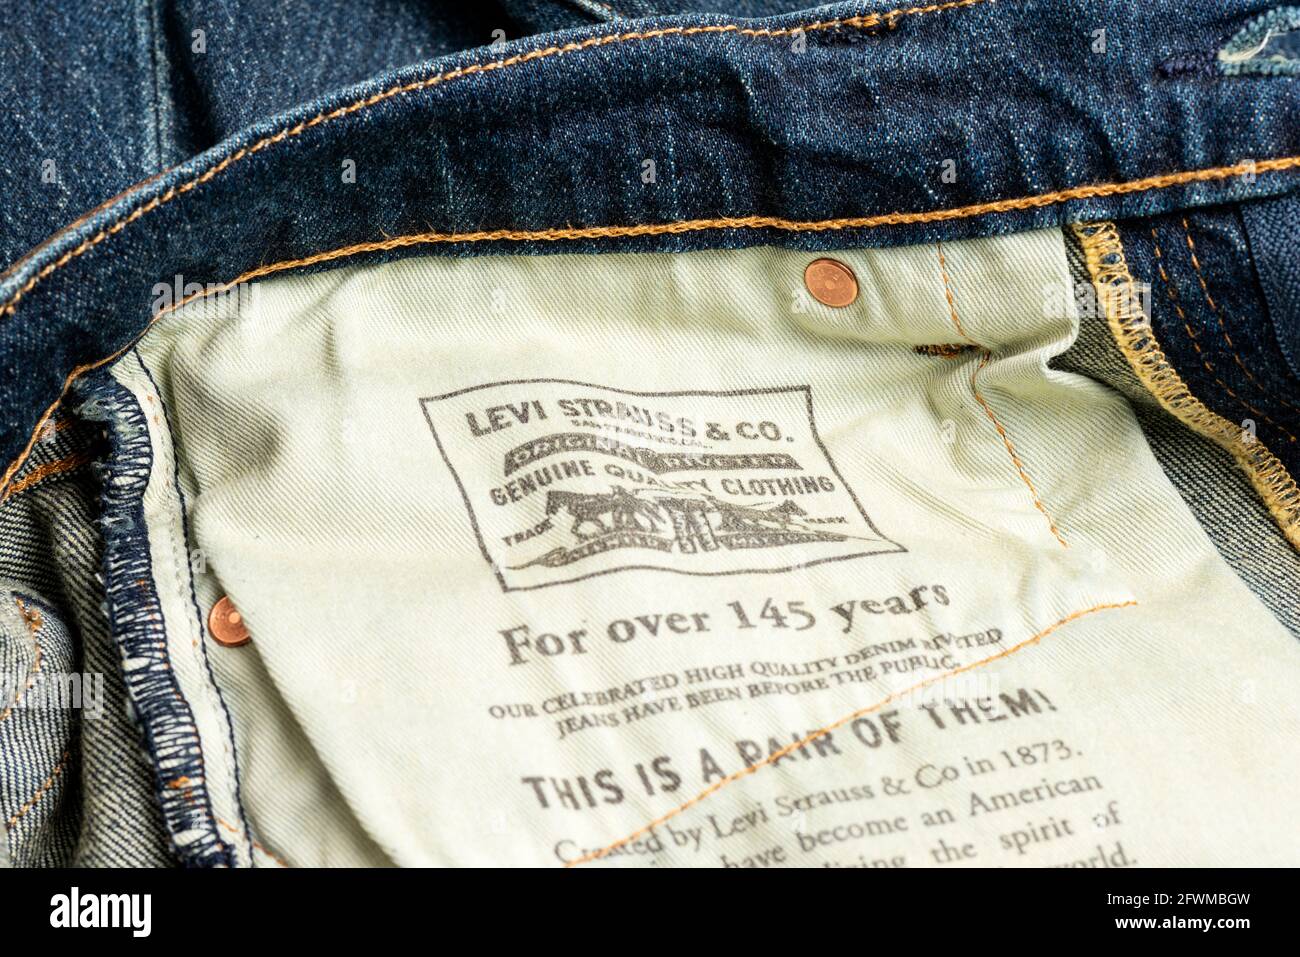 Levi's pair of jeans inside text and label Stock Photo - Alamy